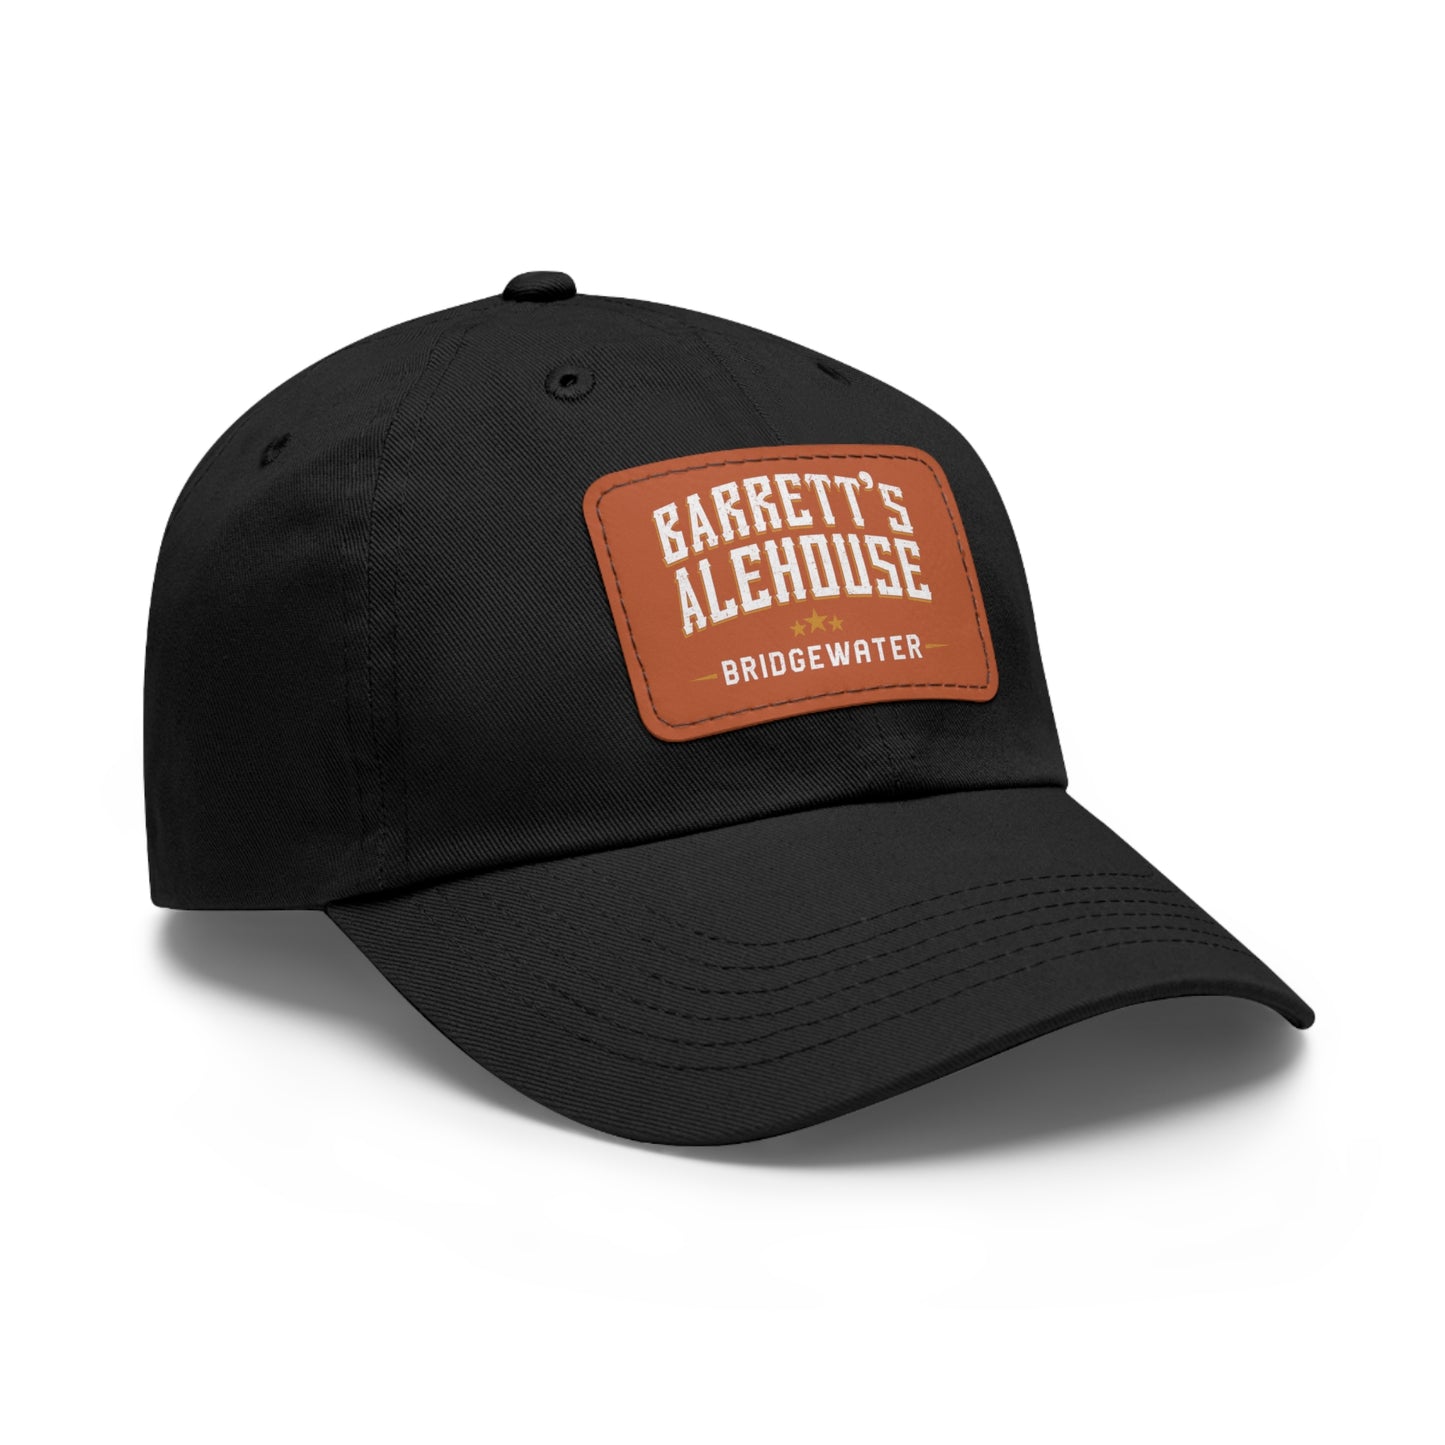 Barrett's Alehouse Bridgewater Dad Cap with Leather Patch